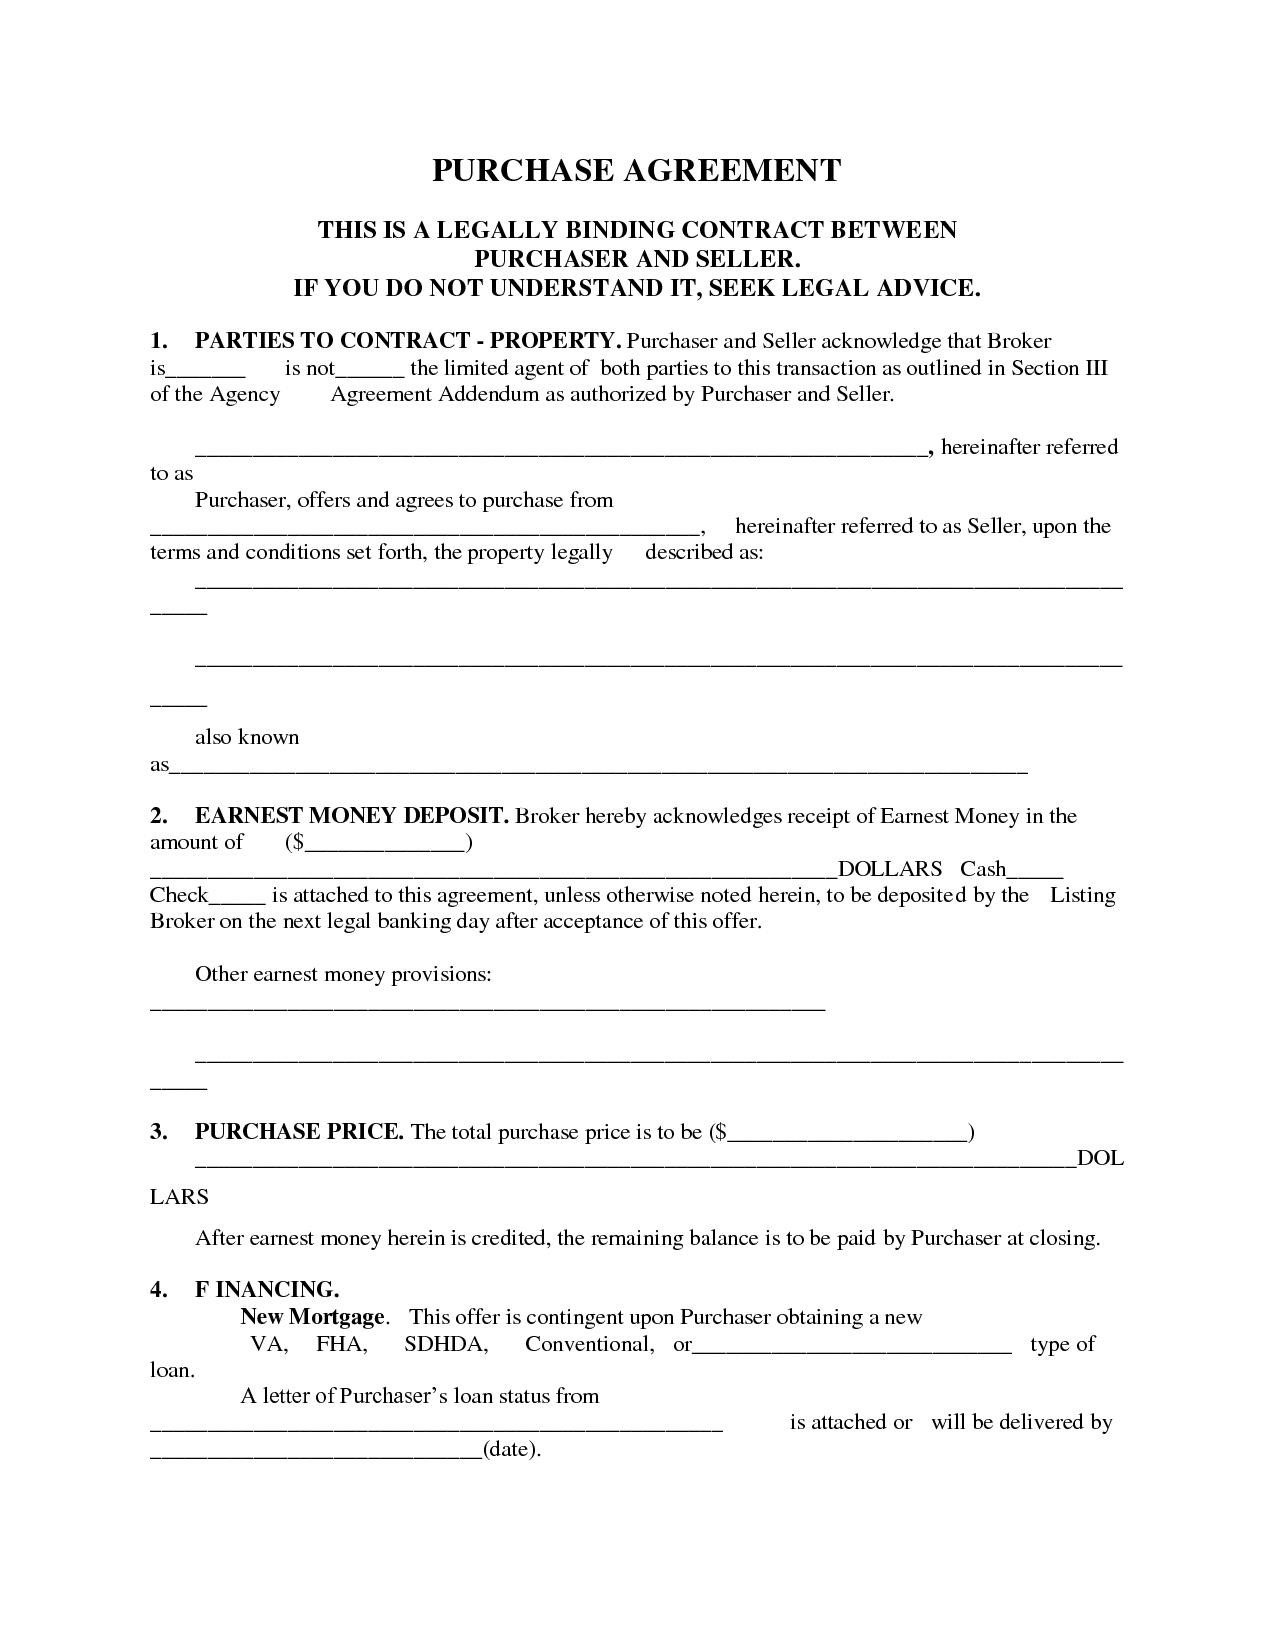 Free Printable Real Estate Assignment Contract Form #146 - Ocweb - Free Printable Real Estate Purchase Agreement